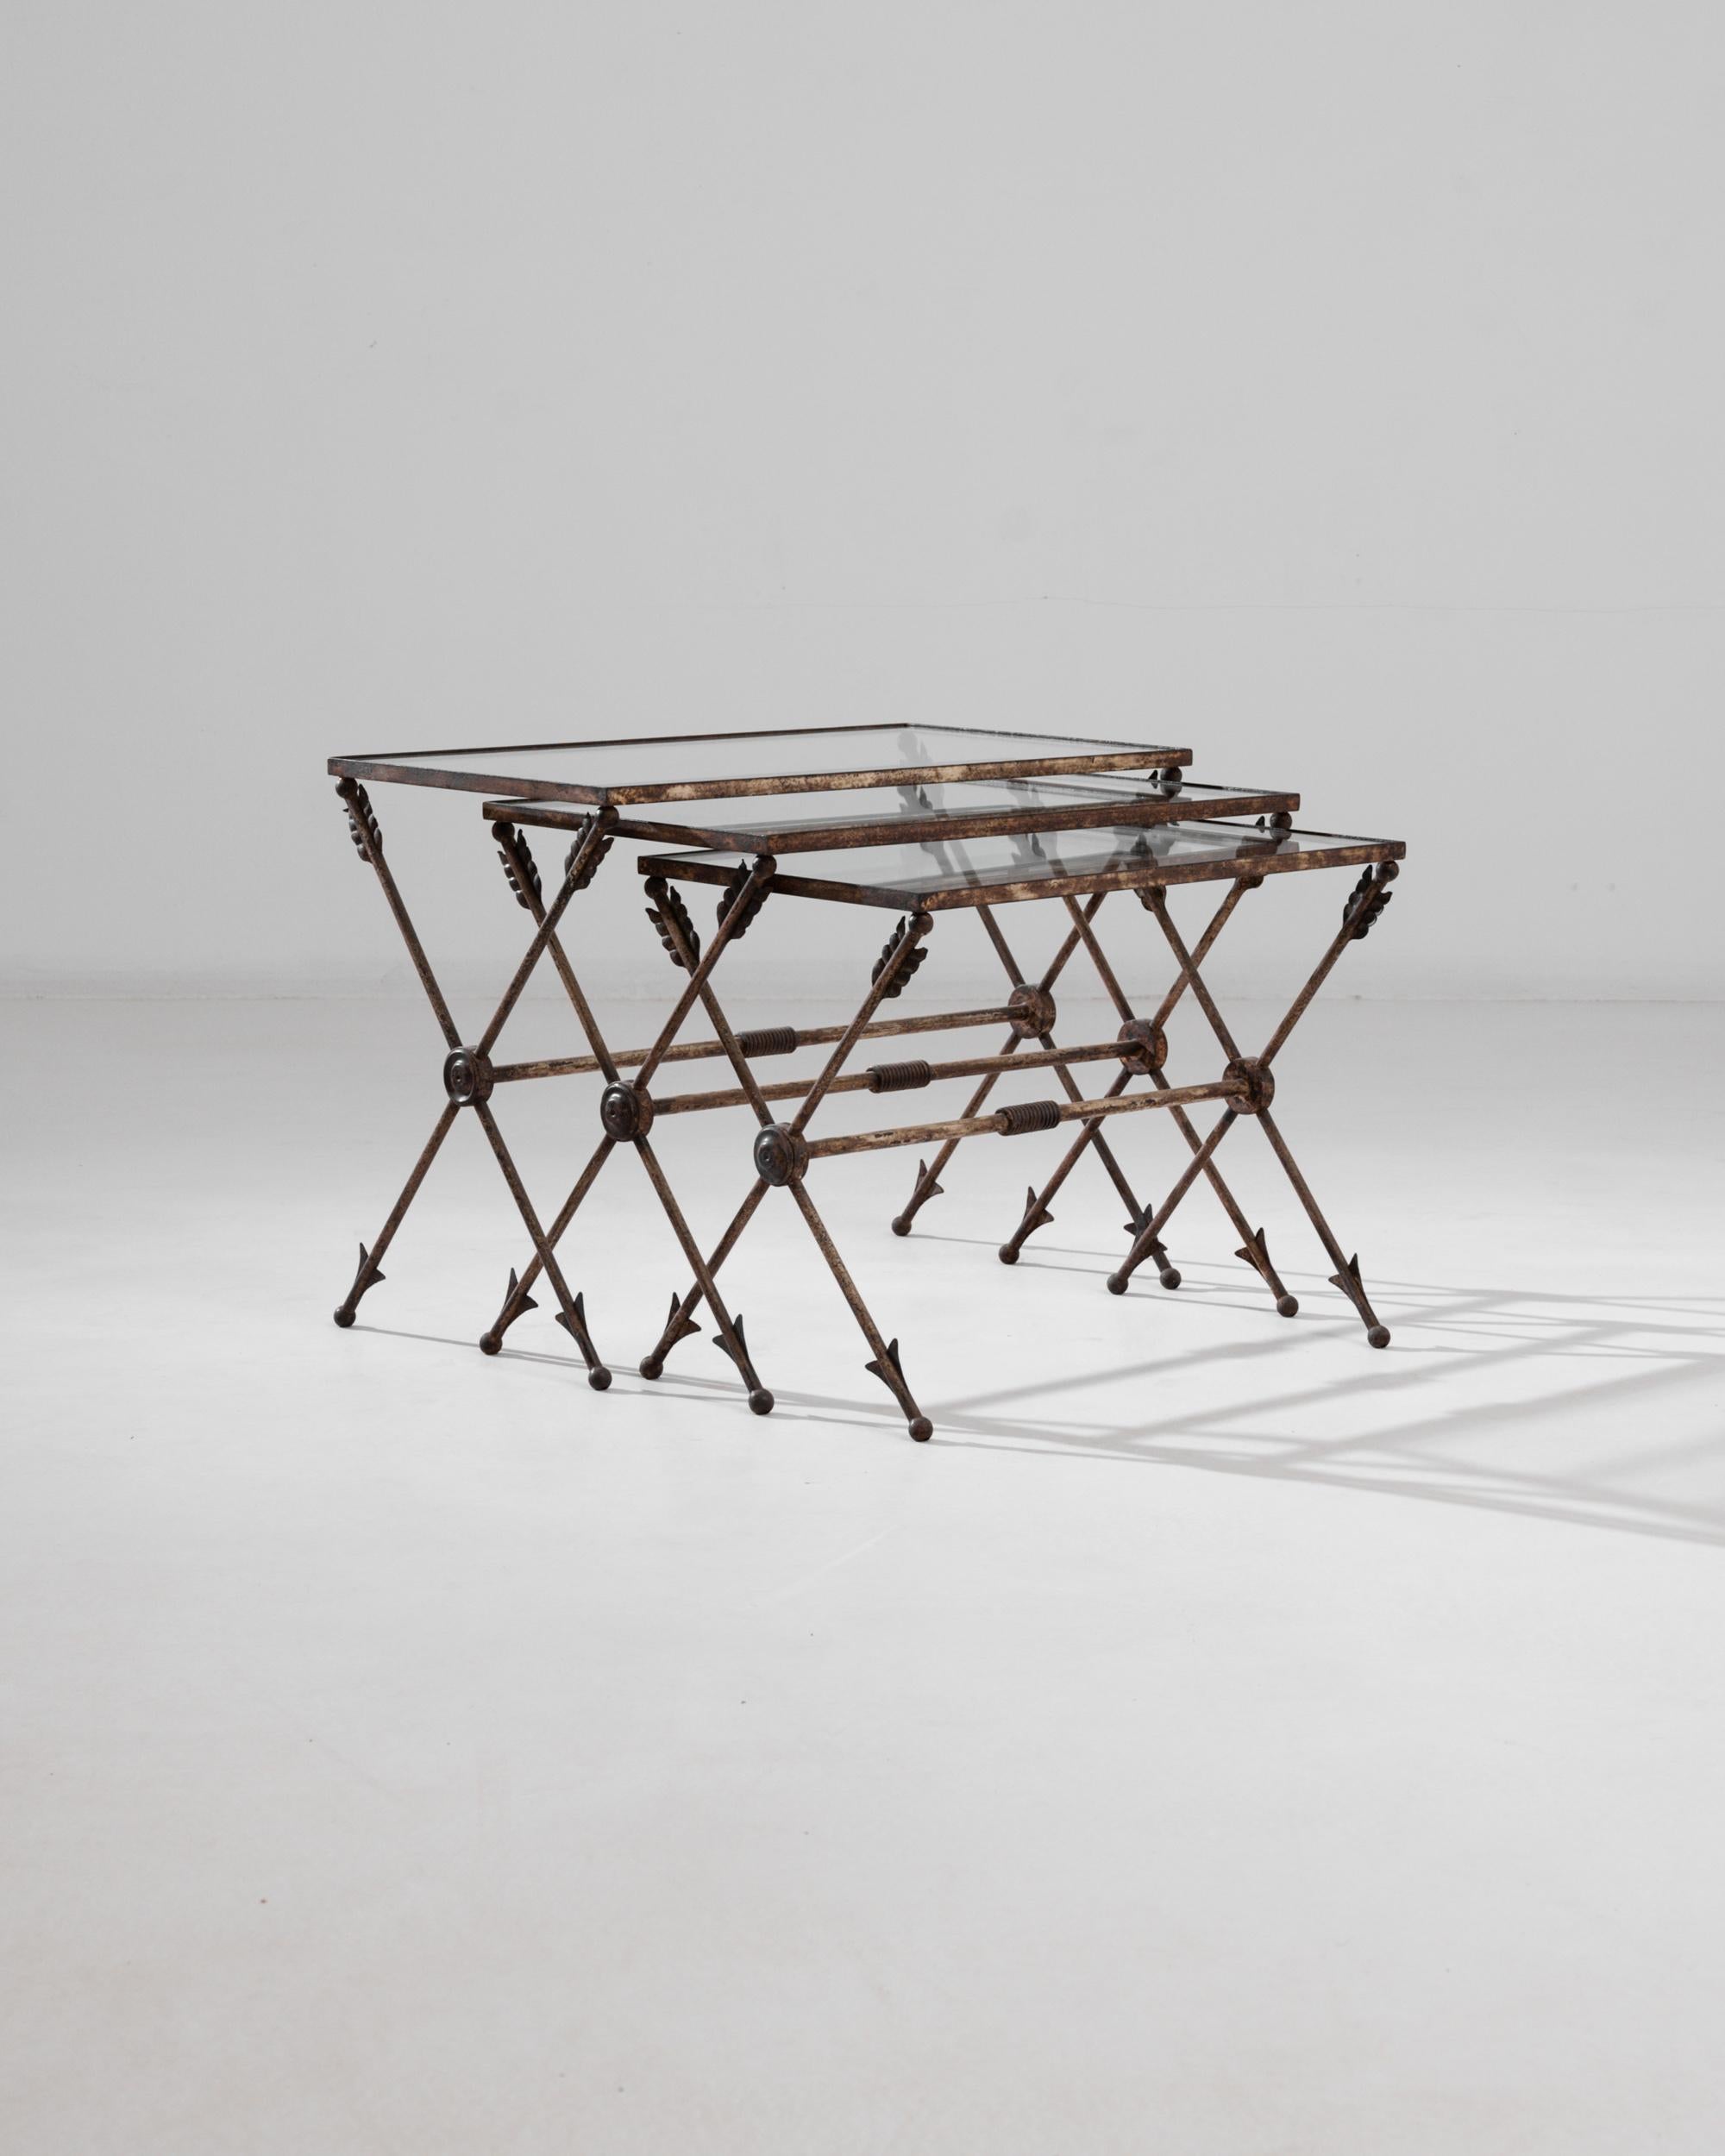 Made in 20th century France, this trio of nesting tables makes a unique vintage accent. A tabletop of transparent glass sits atop a slender metal frame, creating a lightweight and agile composition. The X-shaped legs are cast in the form of arrows,